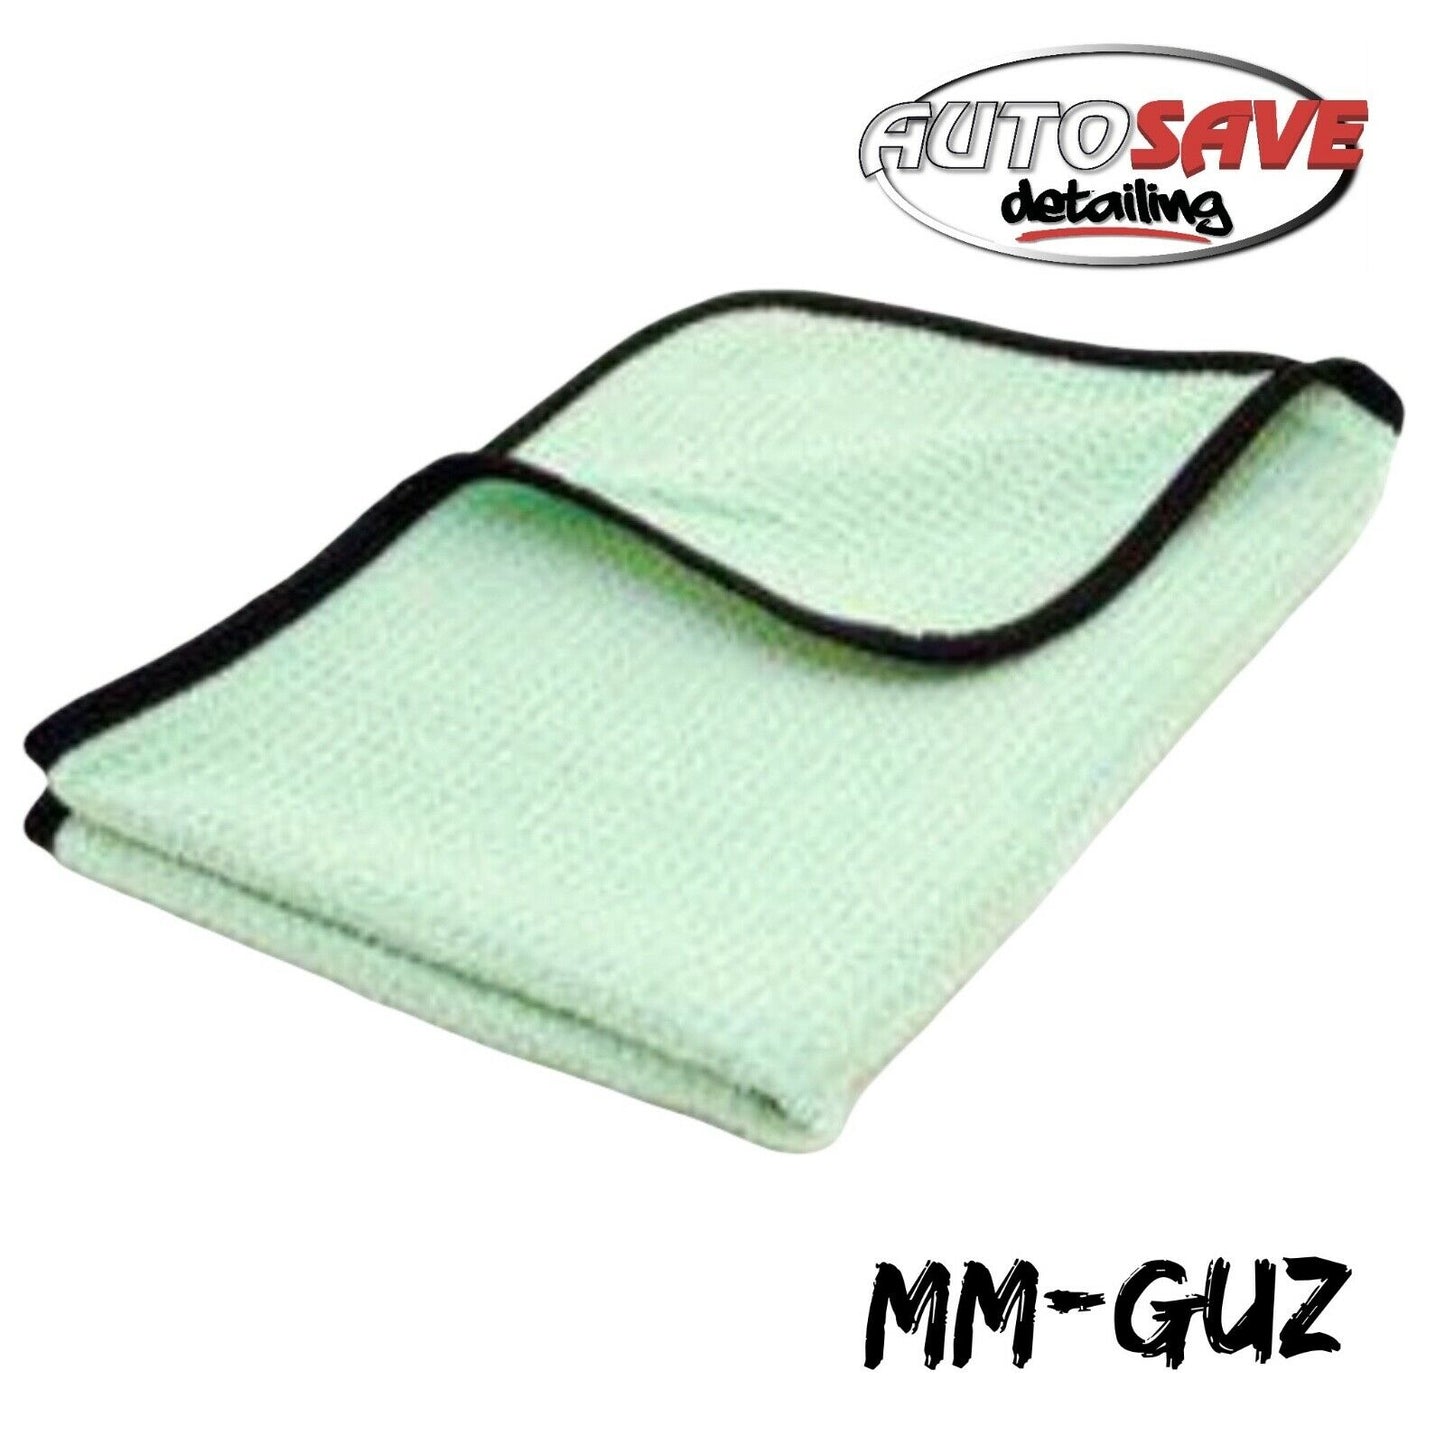 Mammoth Uber Guzzler - Microfibre Waffle Weave Drying Towel -  Large Cloth